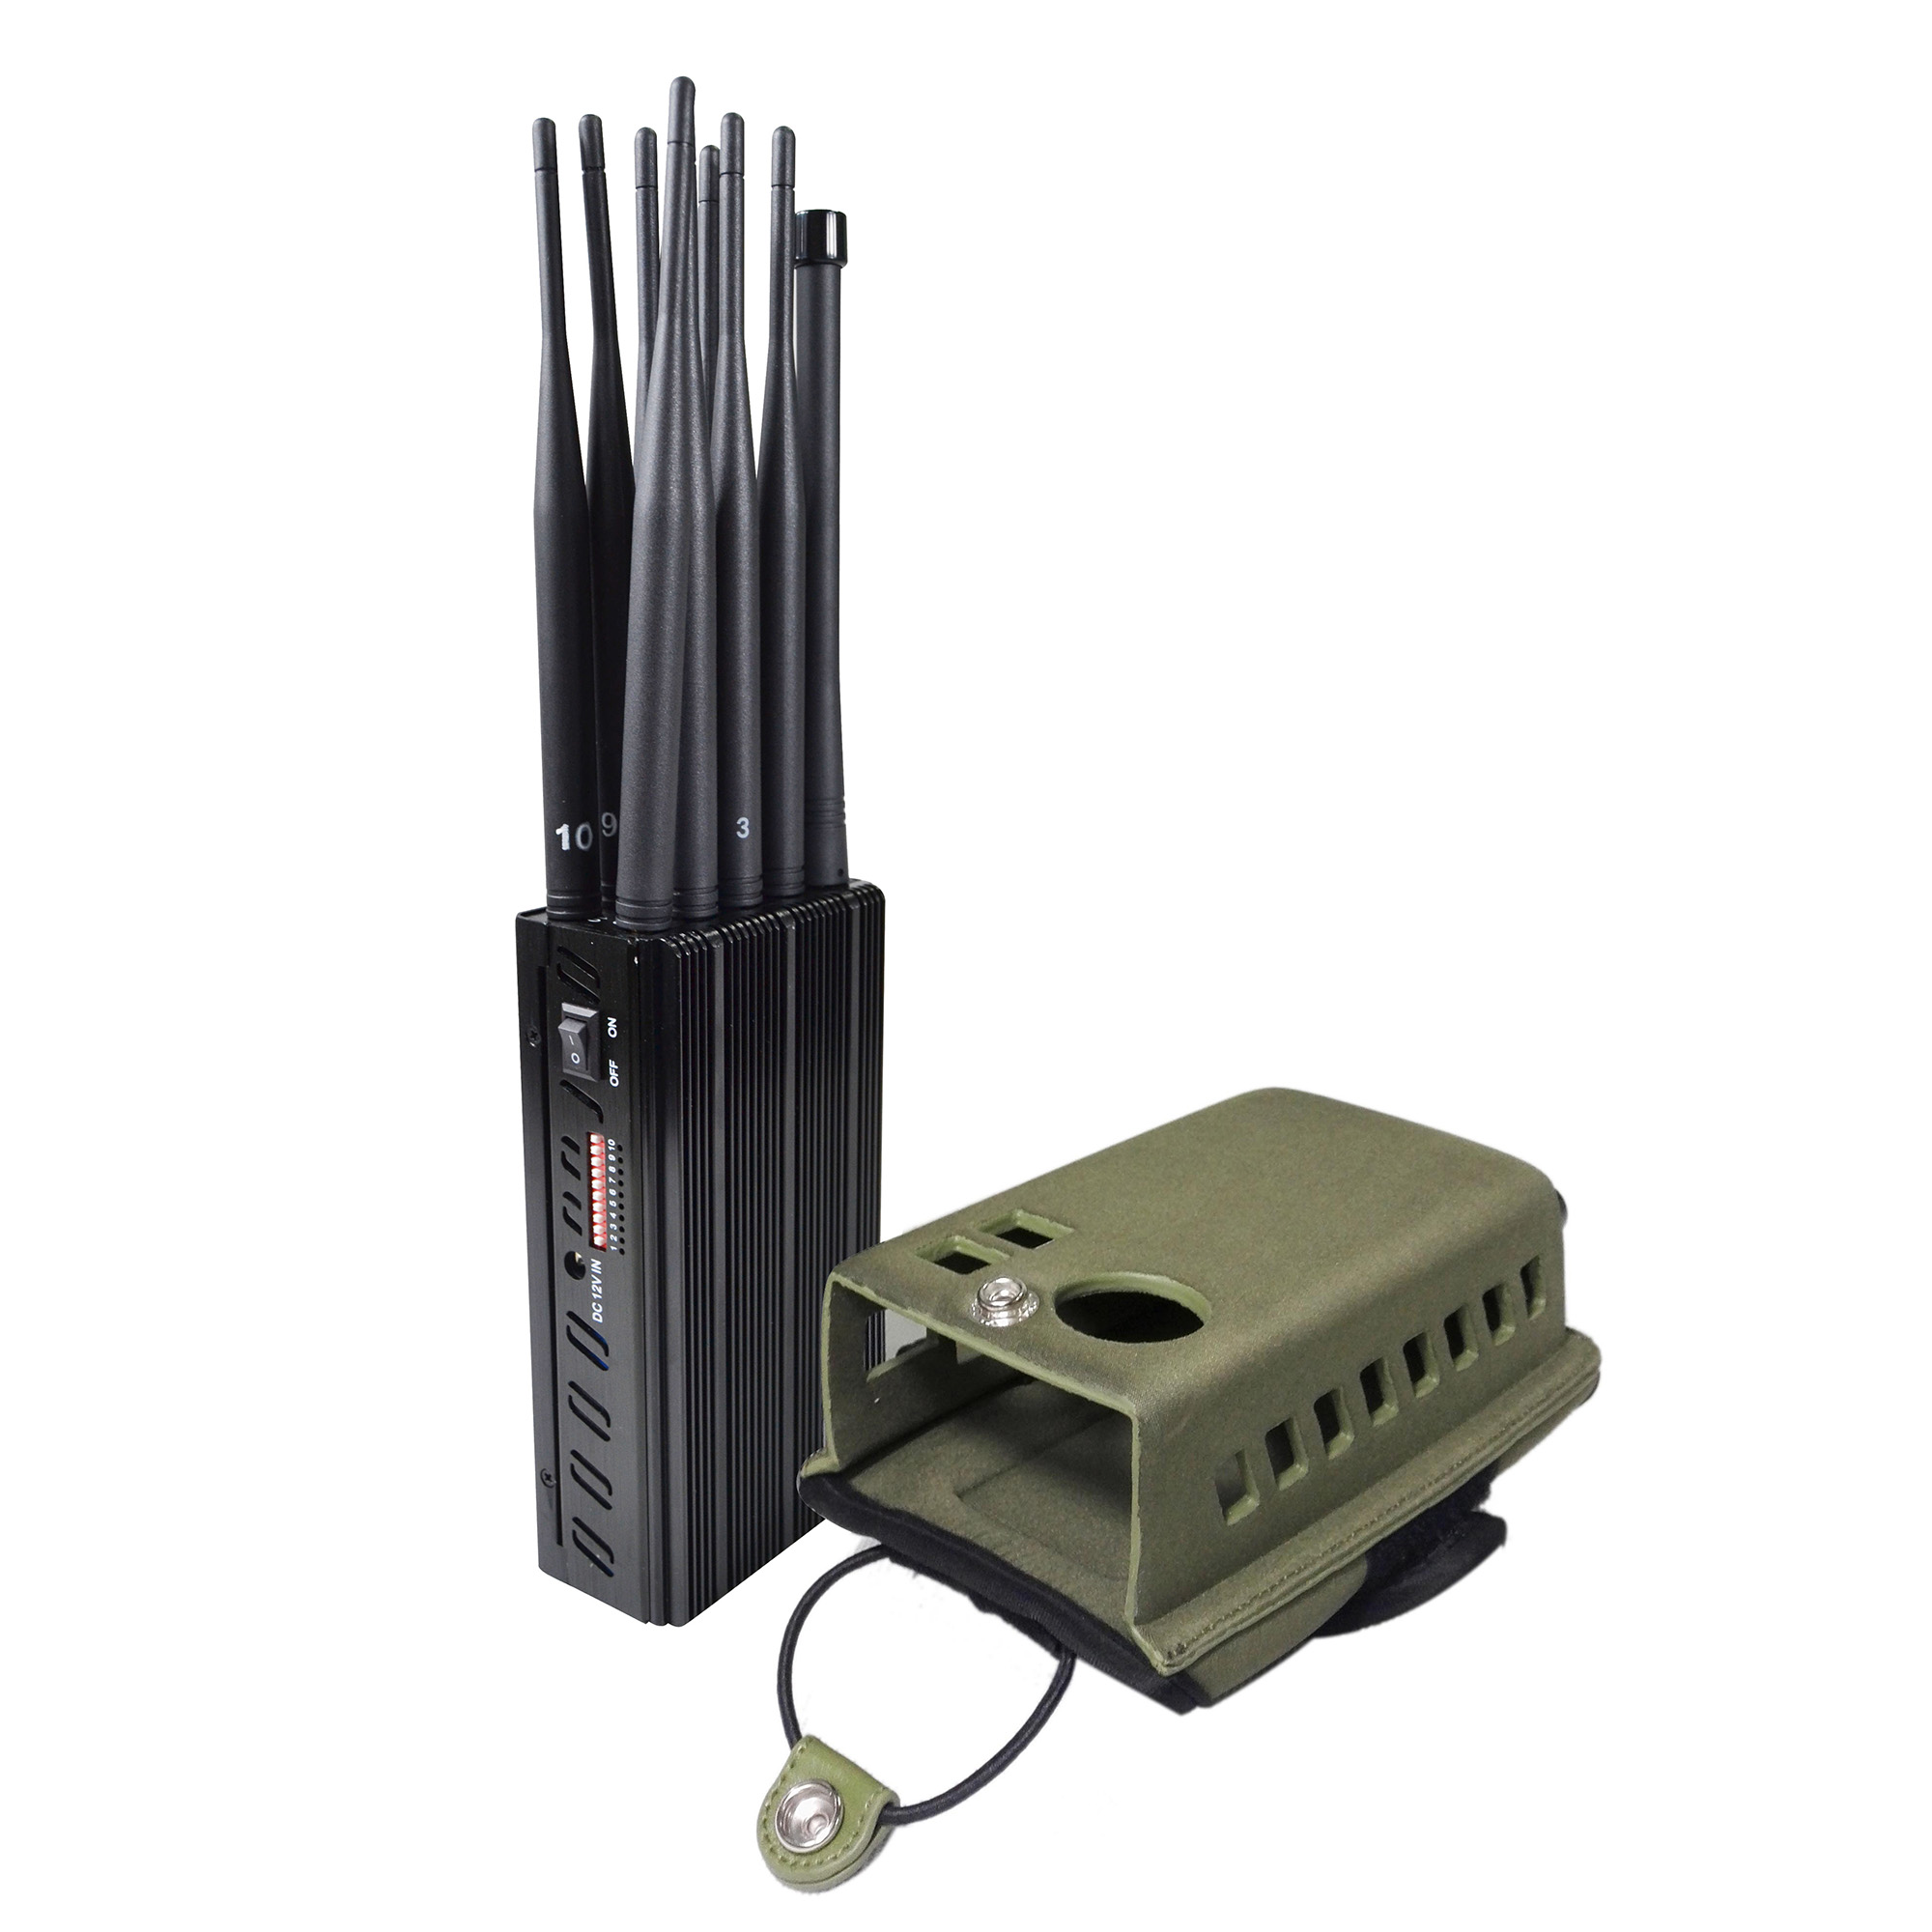 Latest Portable 10 Antennes GPS wifi2.4G / 5.8G GSM (UMTS) 4G cellphone jammer